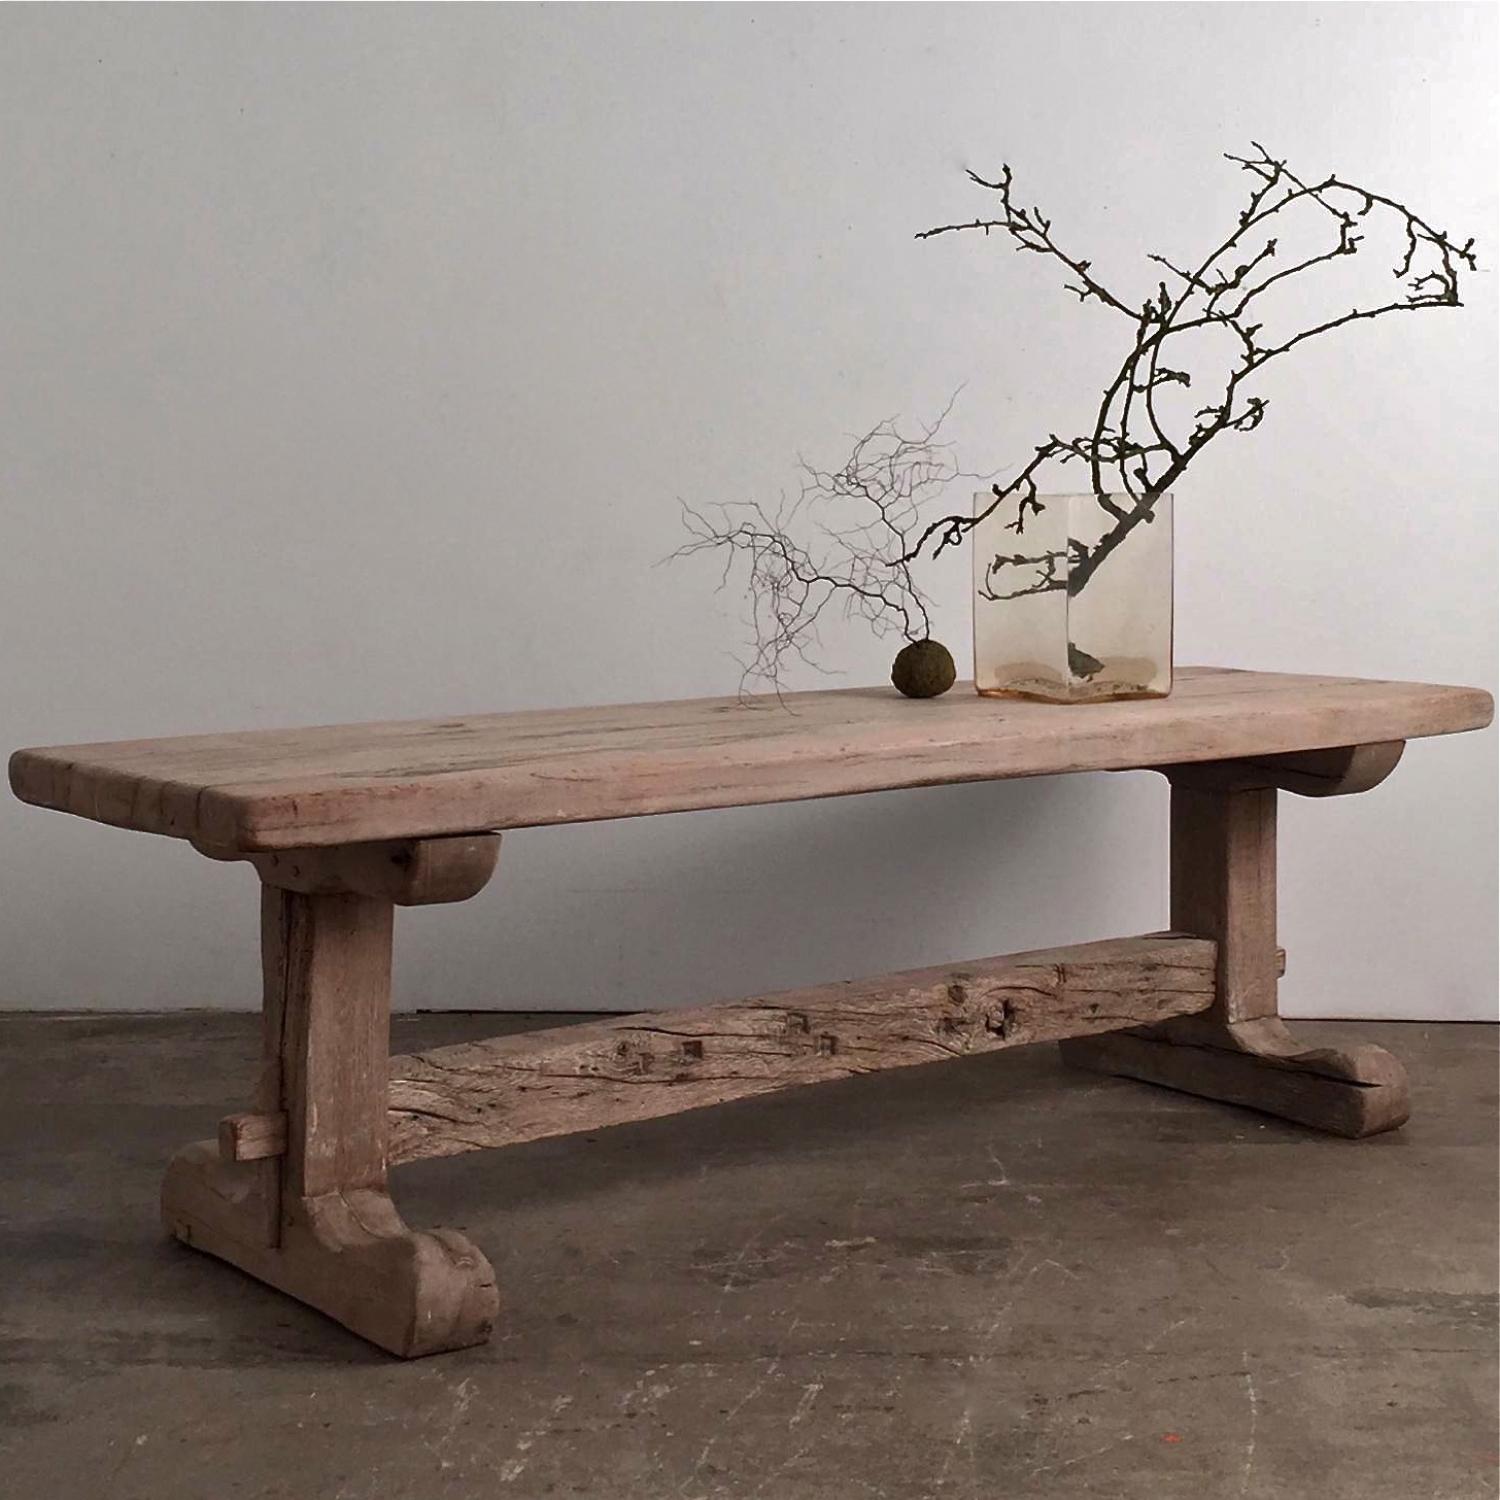 STUNNING 18TH CENTURY FRENCH SOLID OAK REFECTORY TABLE